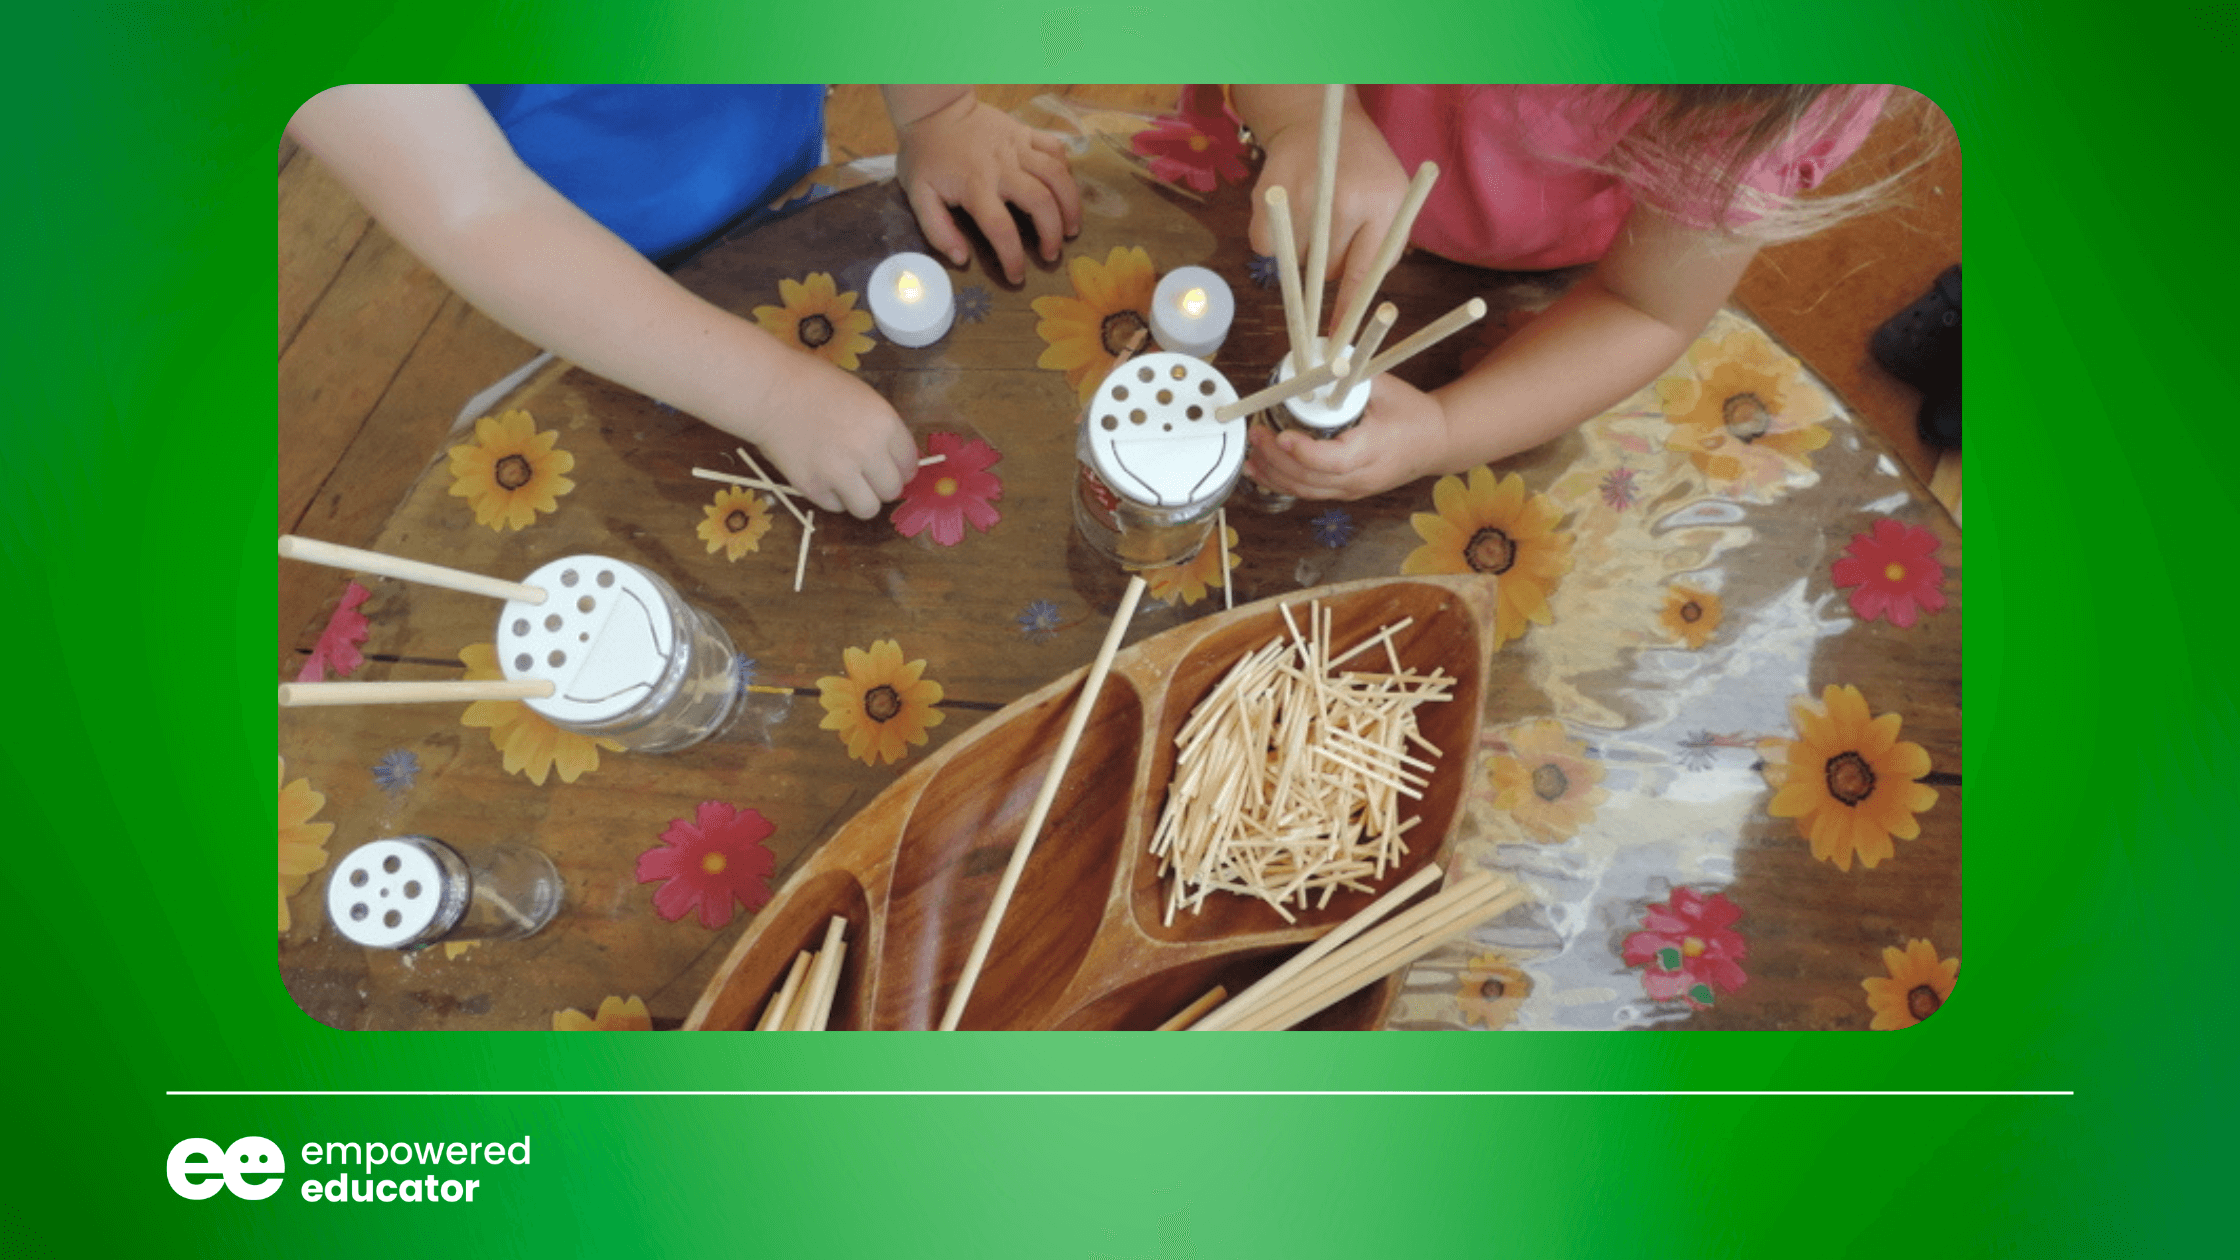 hands-on STEAM activities designed for early childhood learning environments